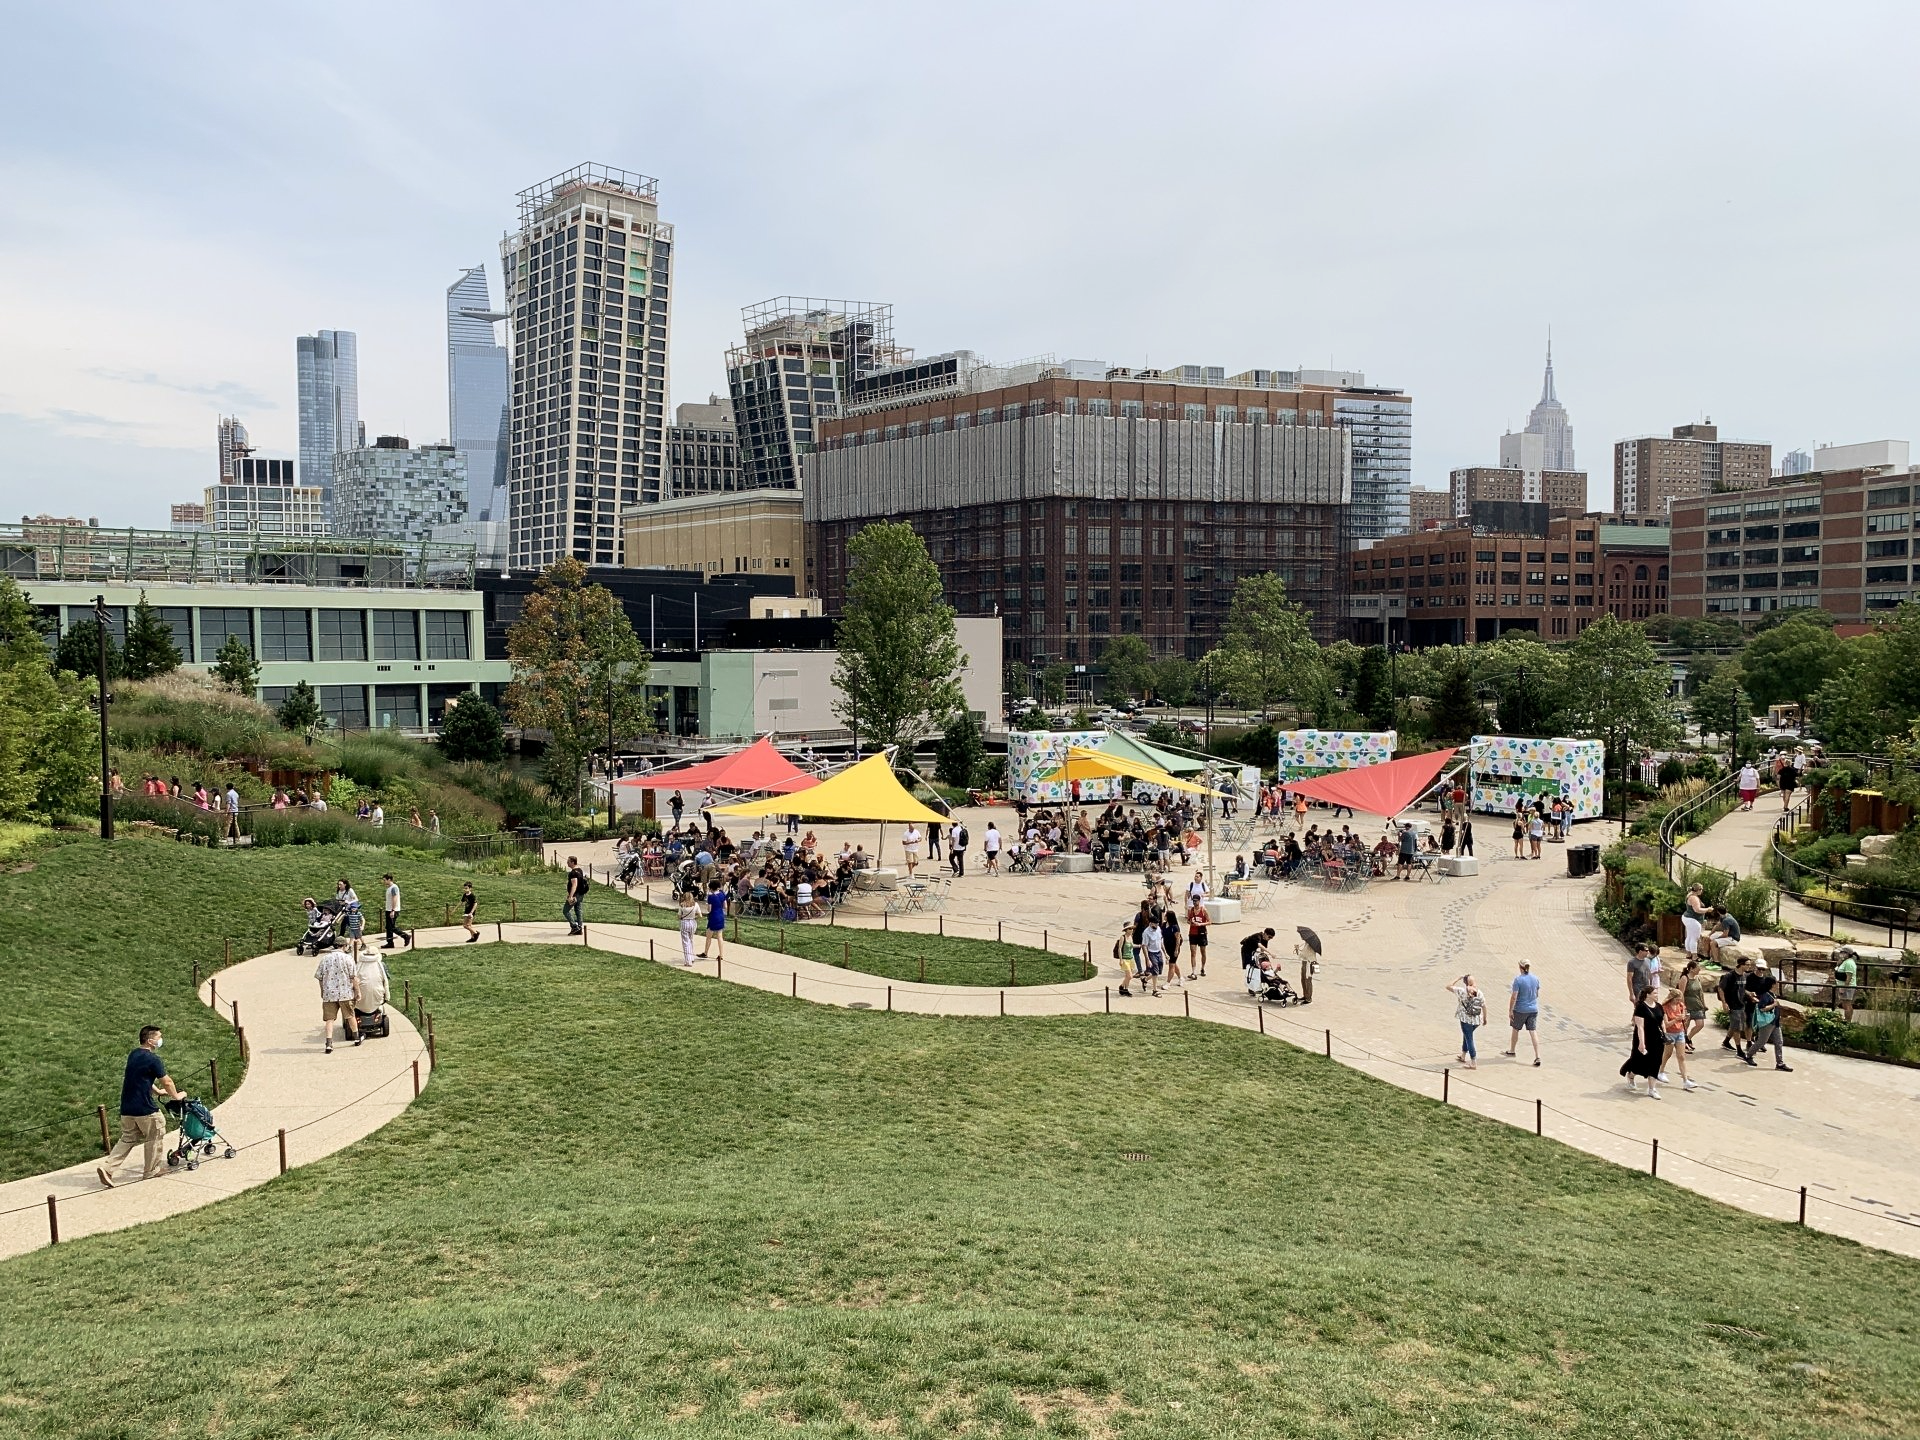 New York City skyline is in the background with the Edge Observatory and Empire State Building prominent.  In the forefront is the dining area with 3 food trucks, yellow & red bright coverings for the seated areas with plenty of people seated and walking around. Closer to the forefront on the left is the winding, accessible pathway.